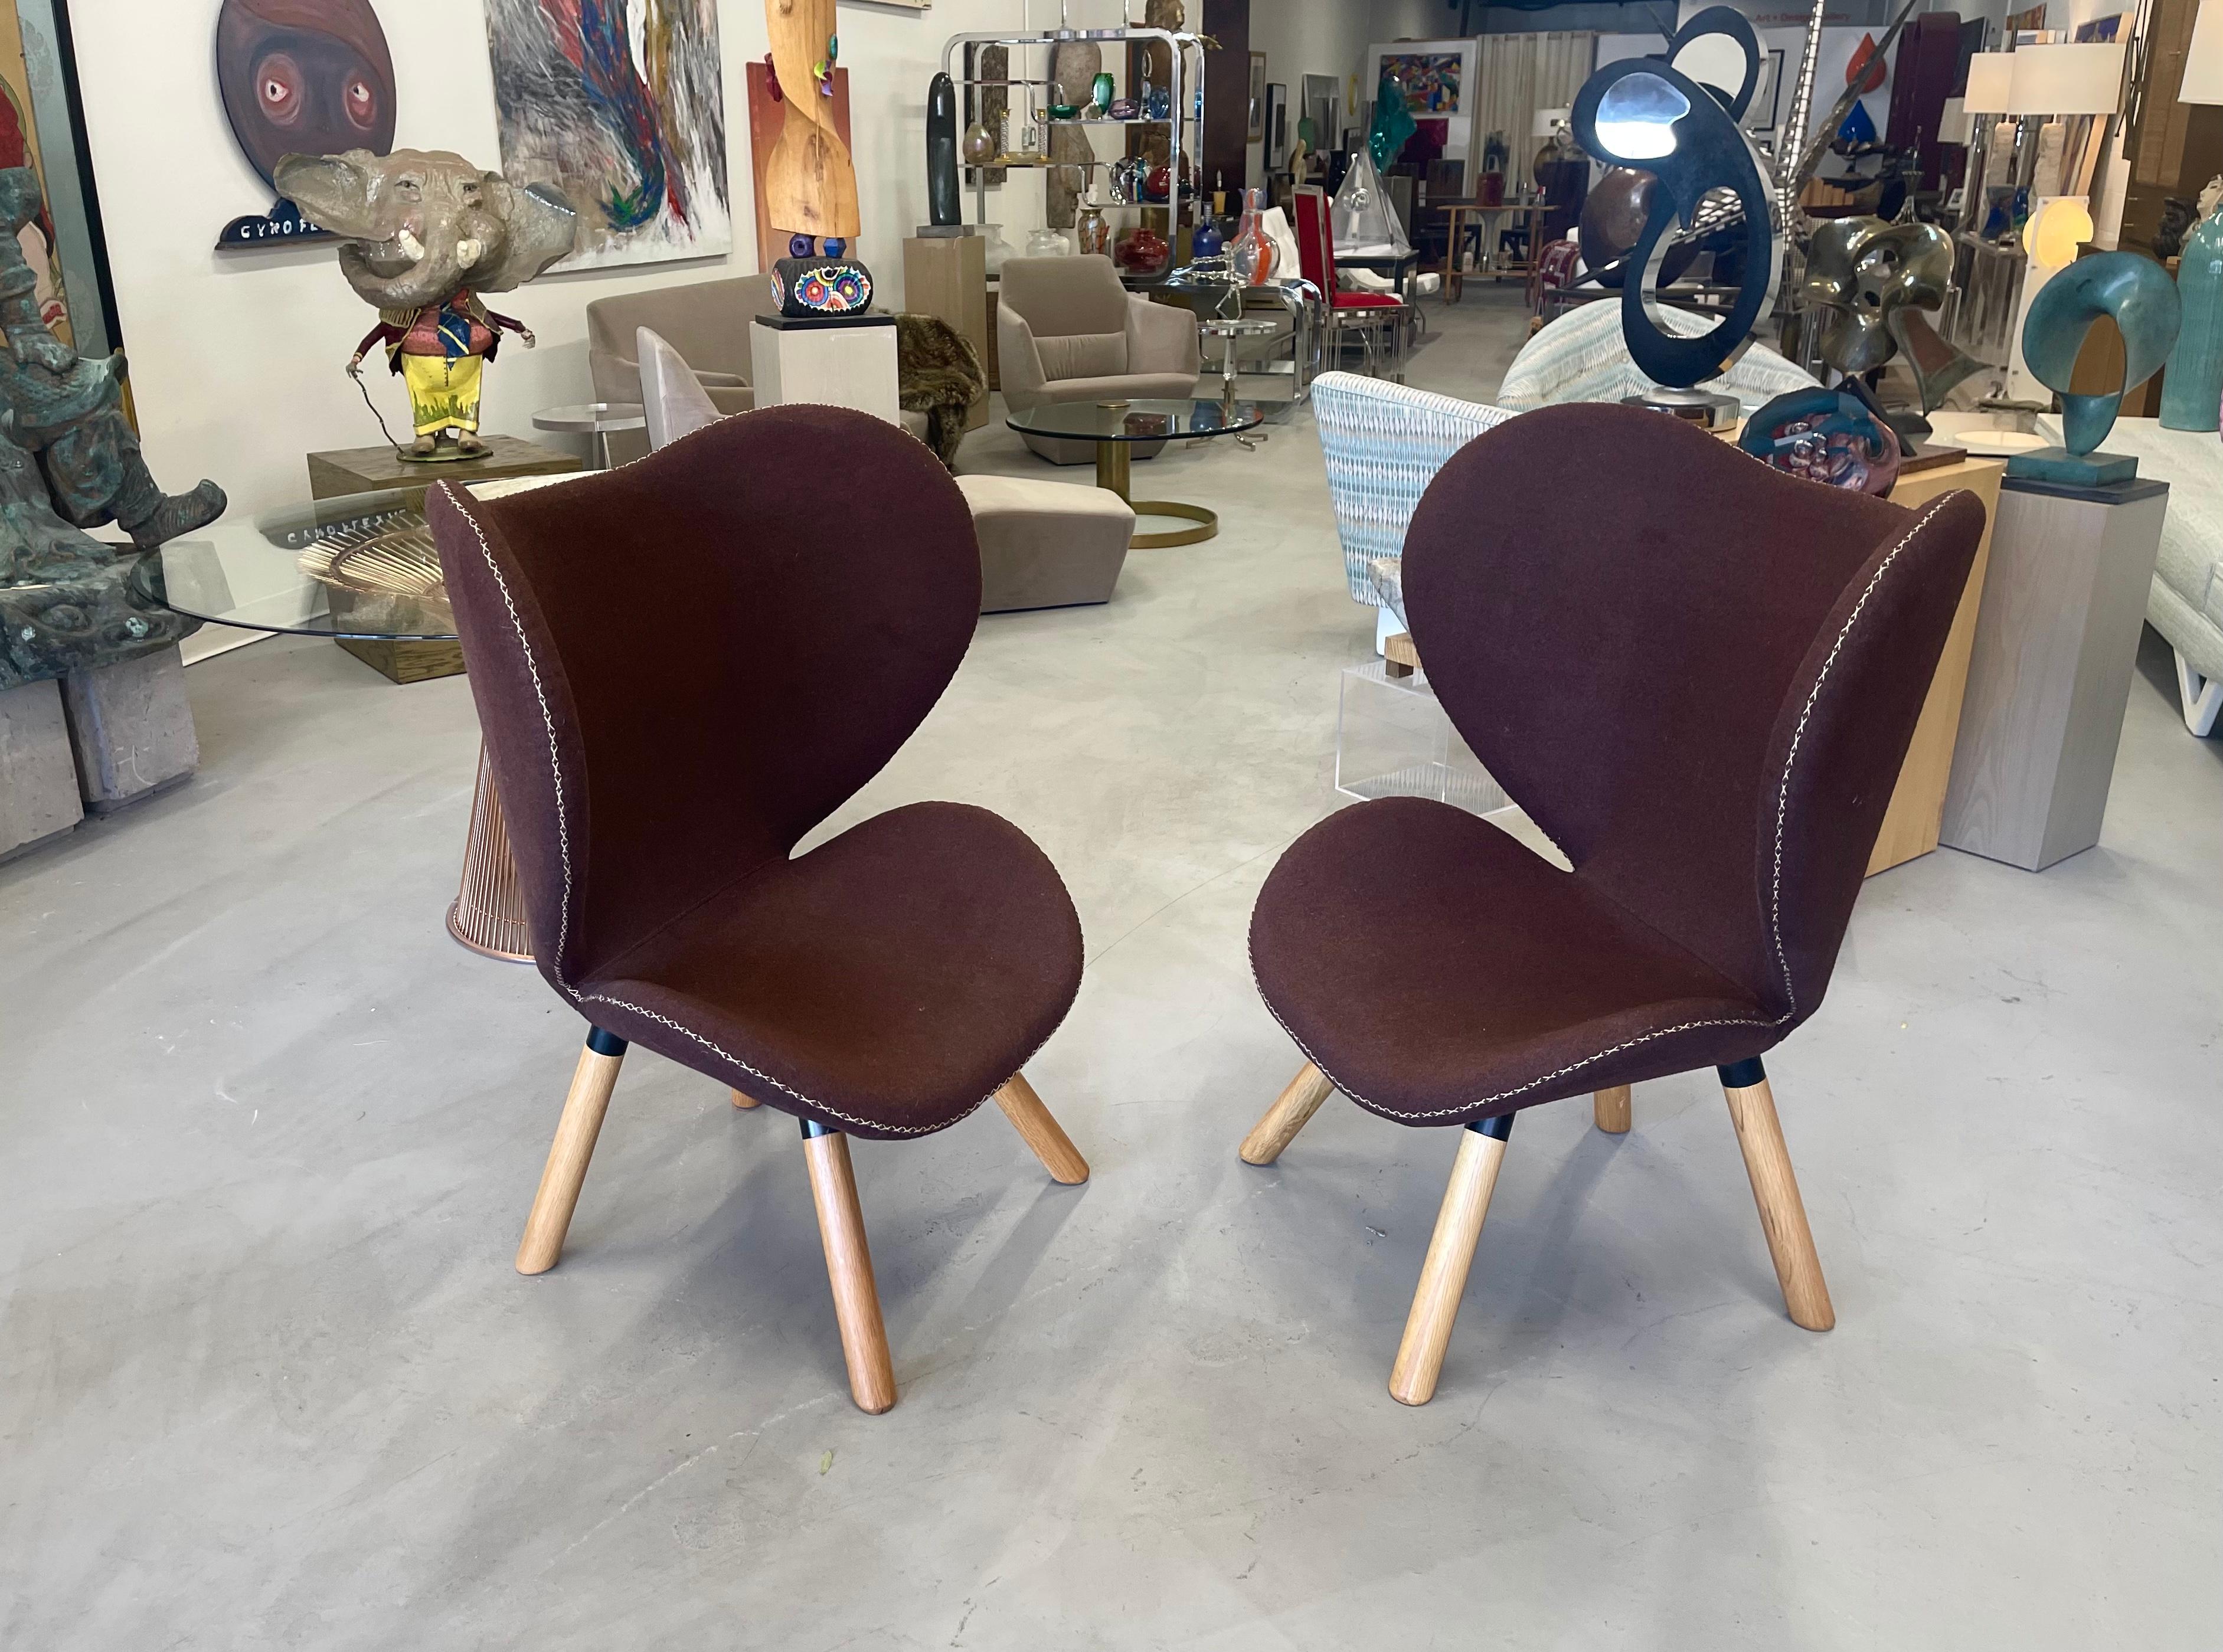 Pretty pair of chairs designed believed to be designed by Marianne Bjorlav, these ButterFly chairs were retailed by the Danish Design Store and have a label underneath. In a chocolate brown felt with great contrasting edge stitching detail. The legs